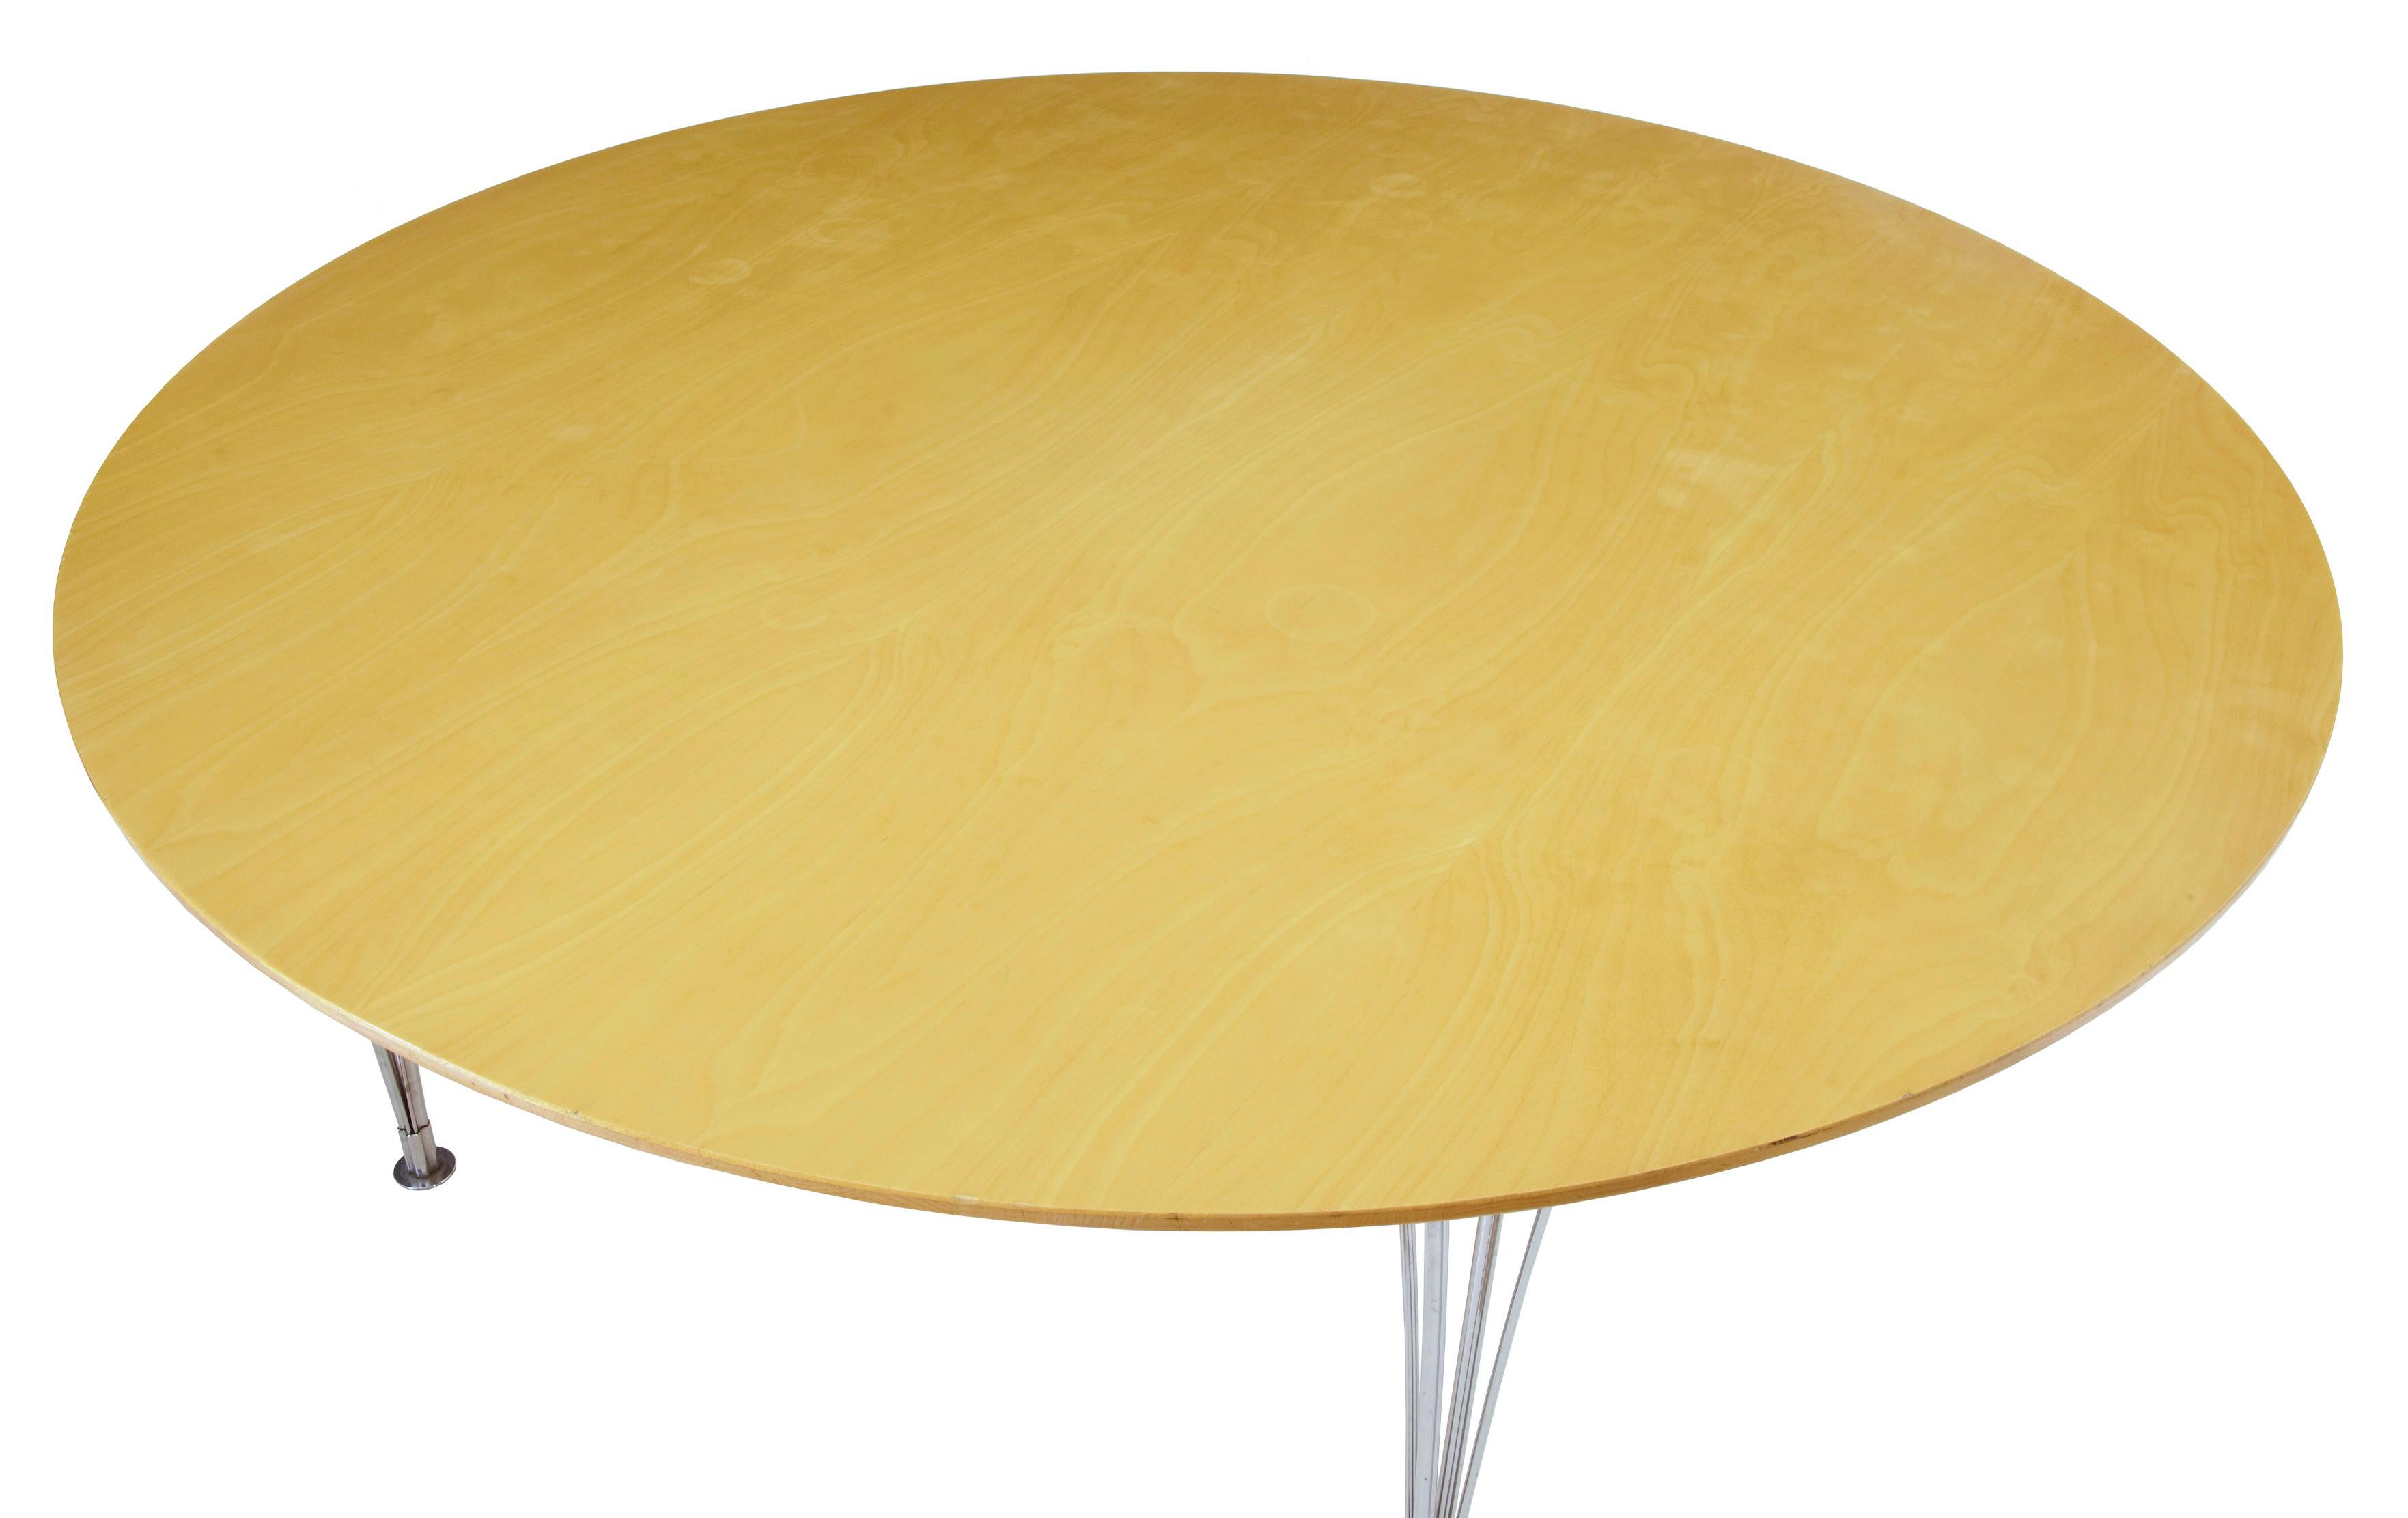 Scandinavian Bruno Mathsson round birch dining table, circa 1980.

Fine piece of well known Scandinavian design by Bruno Mathsson which seats 10. Detachable chromed legs. Circular birch veneered top.

Some marks to outer edge and 1 small dent on